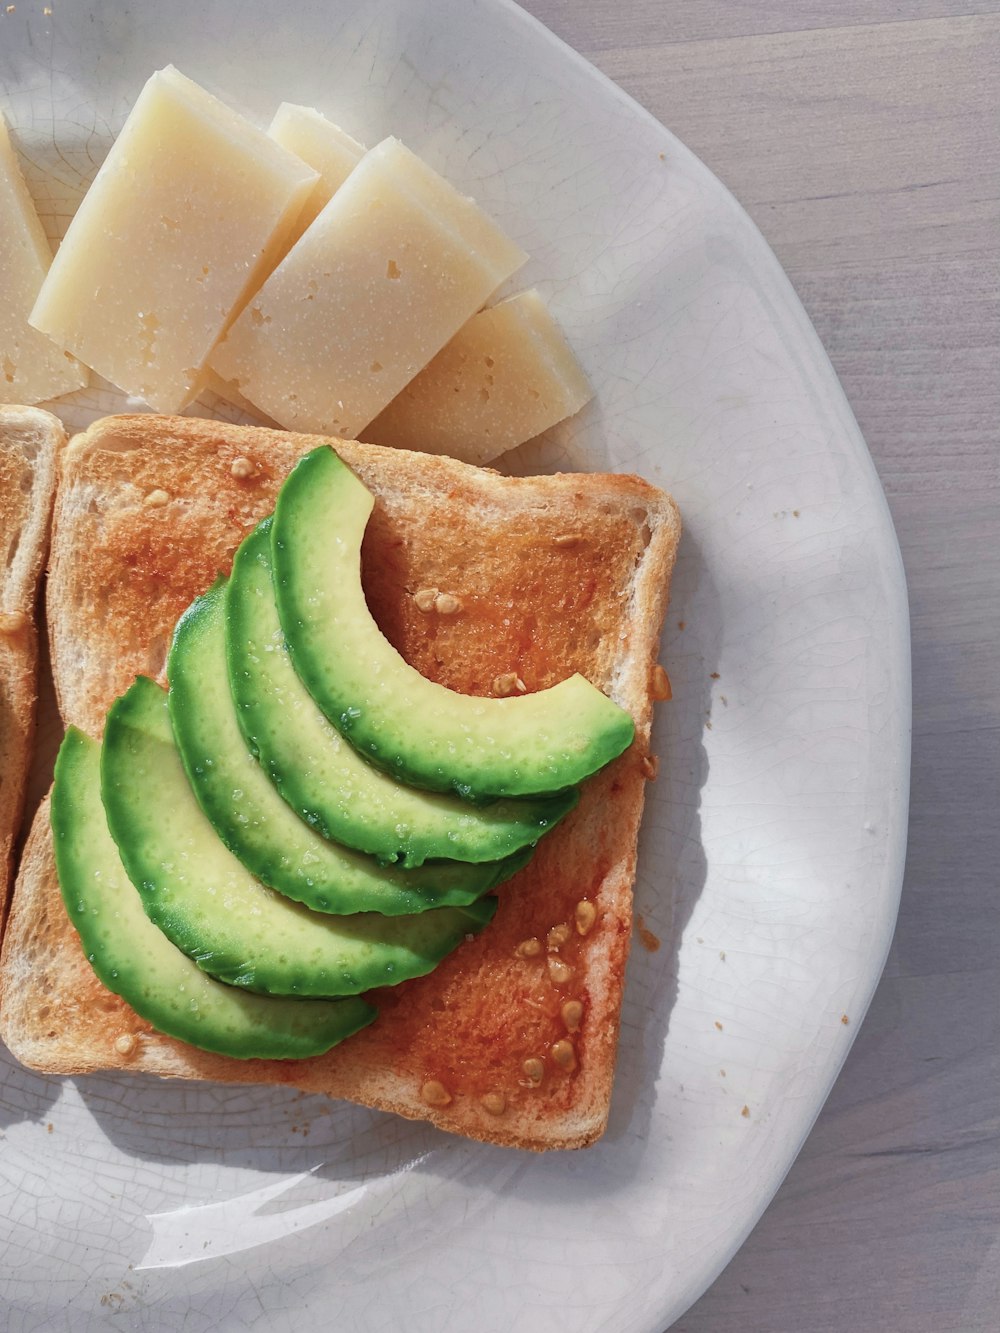 sliced bread with sliced cucumber on white ceramic plate